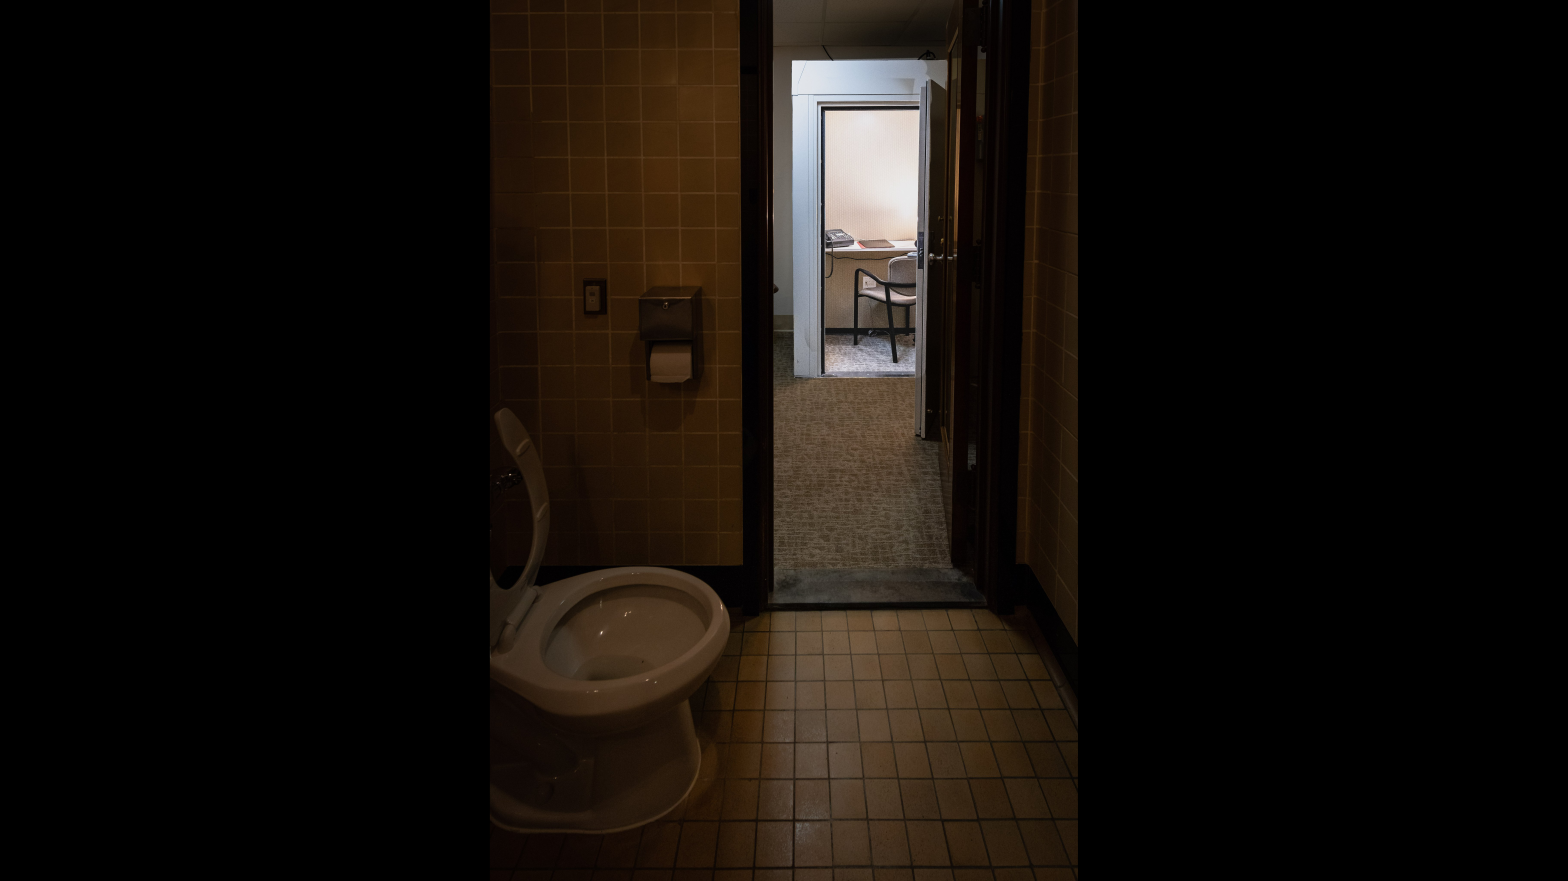 The two rooms where Pruitt spewed bullshit from his arse and mouth. (Photo: EPA via E&E News, Fair Use)